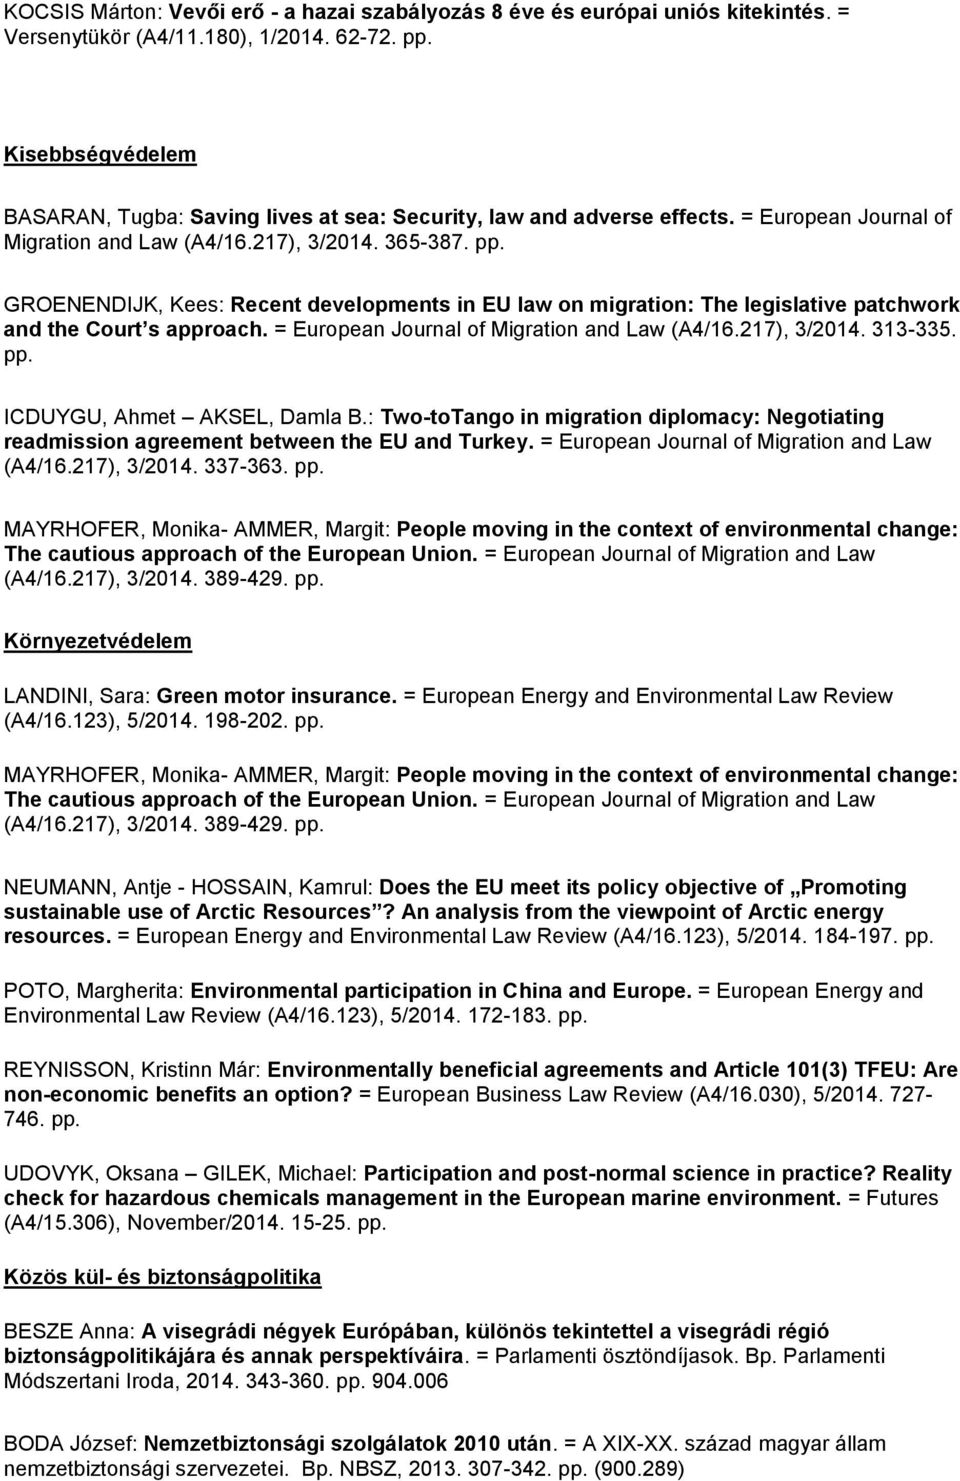 GROENENDIJK, Kees: Recent developments in EU law on migration: The legislative patchwork and the Court s approach. = European Journal of Migration and Law (A4/16.217), 3/2014. 313-335. pp.